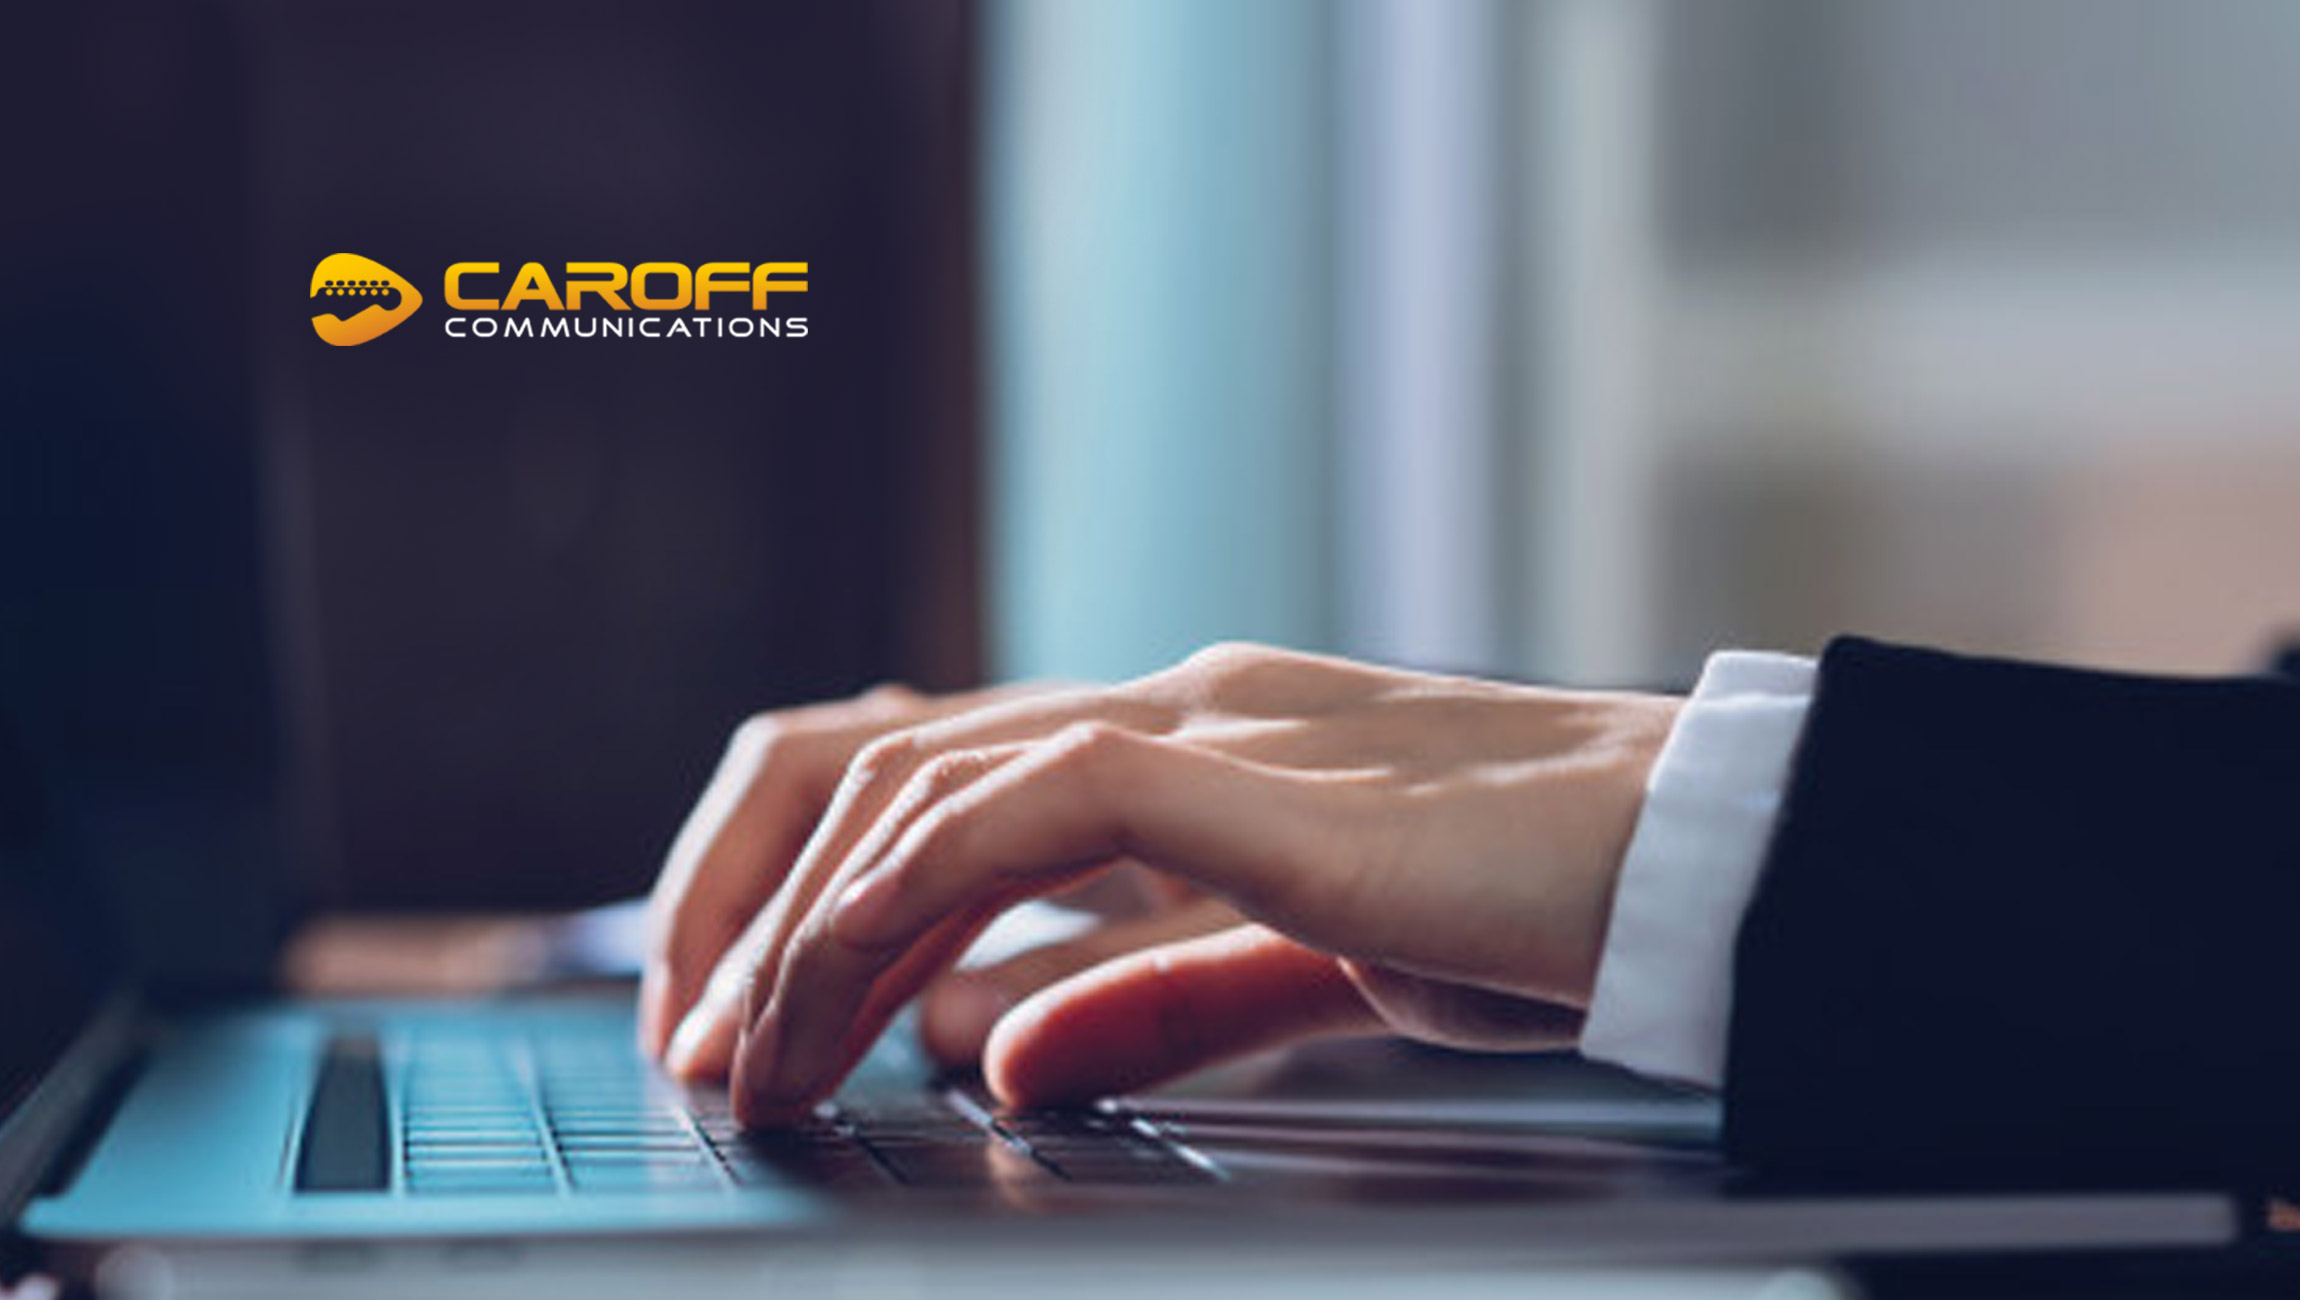 Unique Free Marketing Audit Offered Online by Digital Agency Caroff Communications